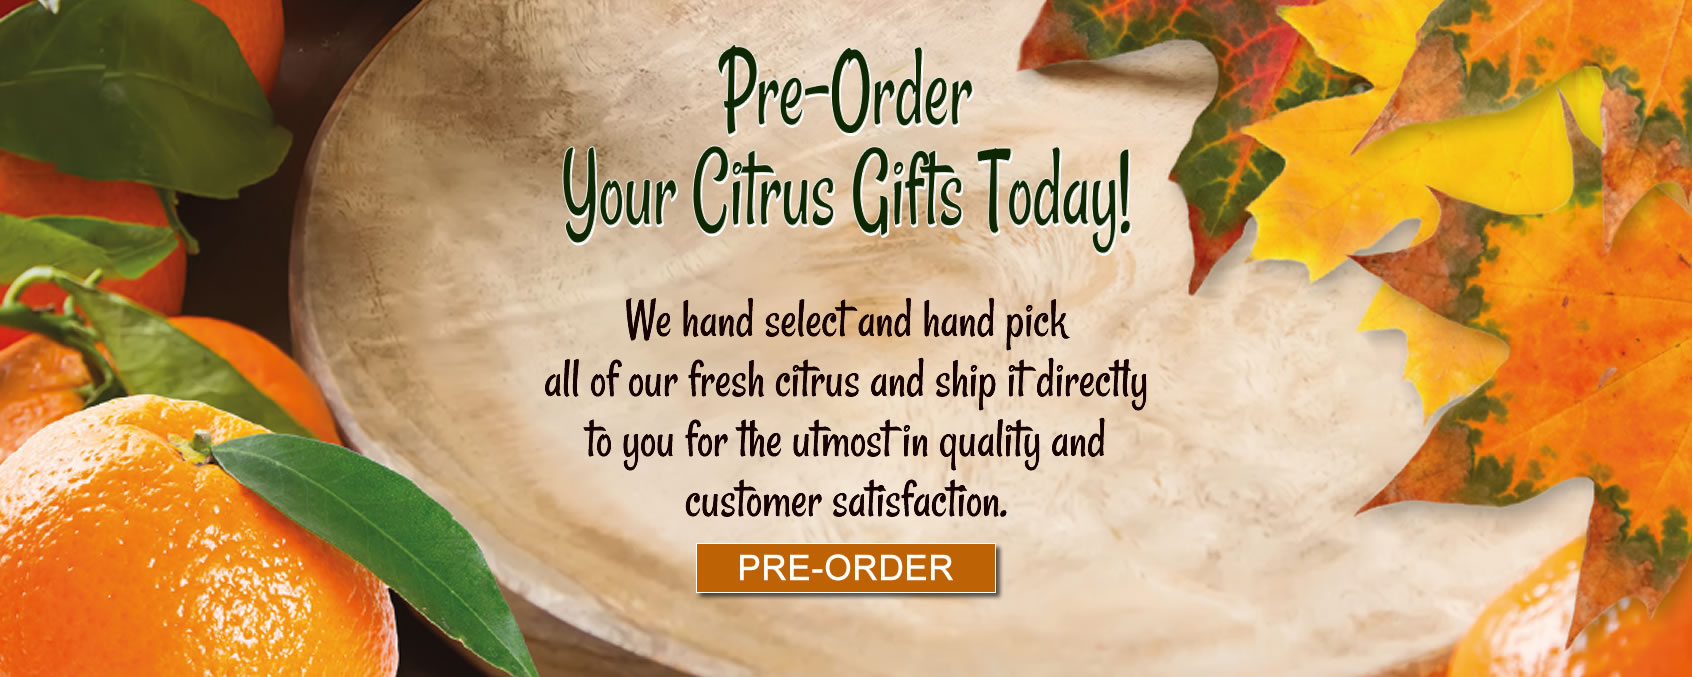 Pre-Order Citrus Gifts